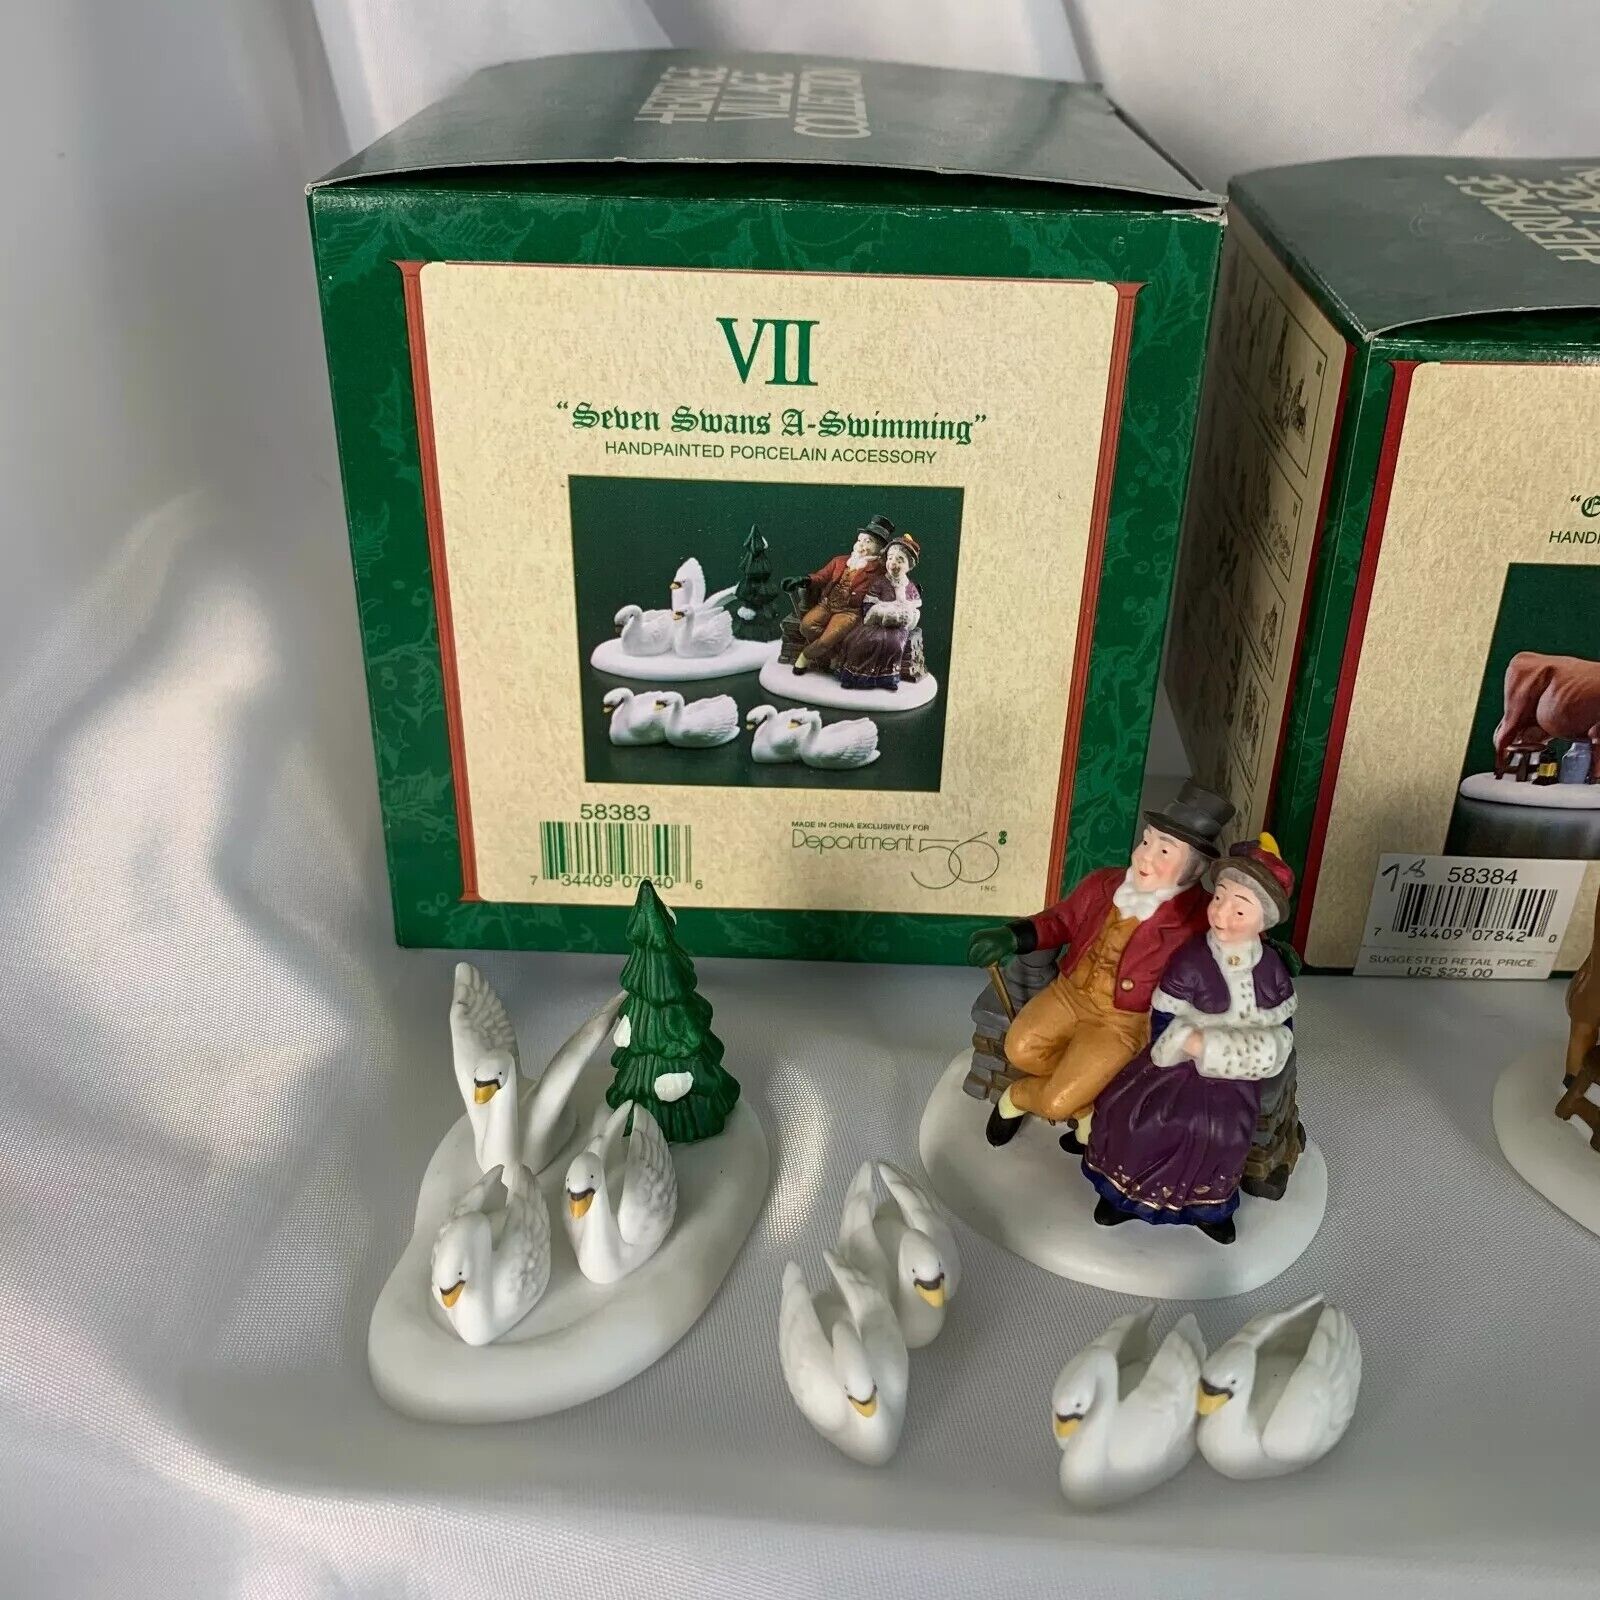 Dept. 56 Dickens Village 12 Days Of Christmas 7 Seven Swans A Swimming 58383